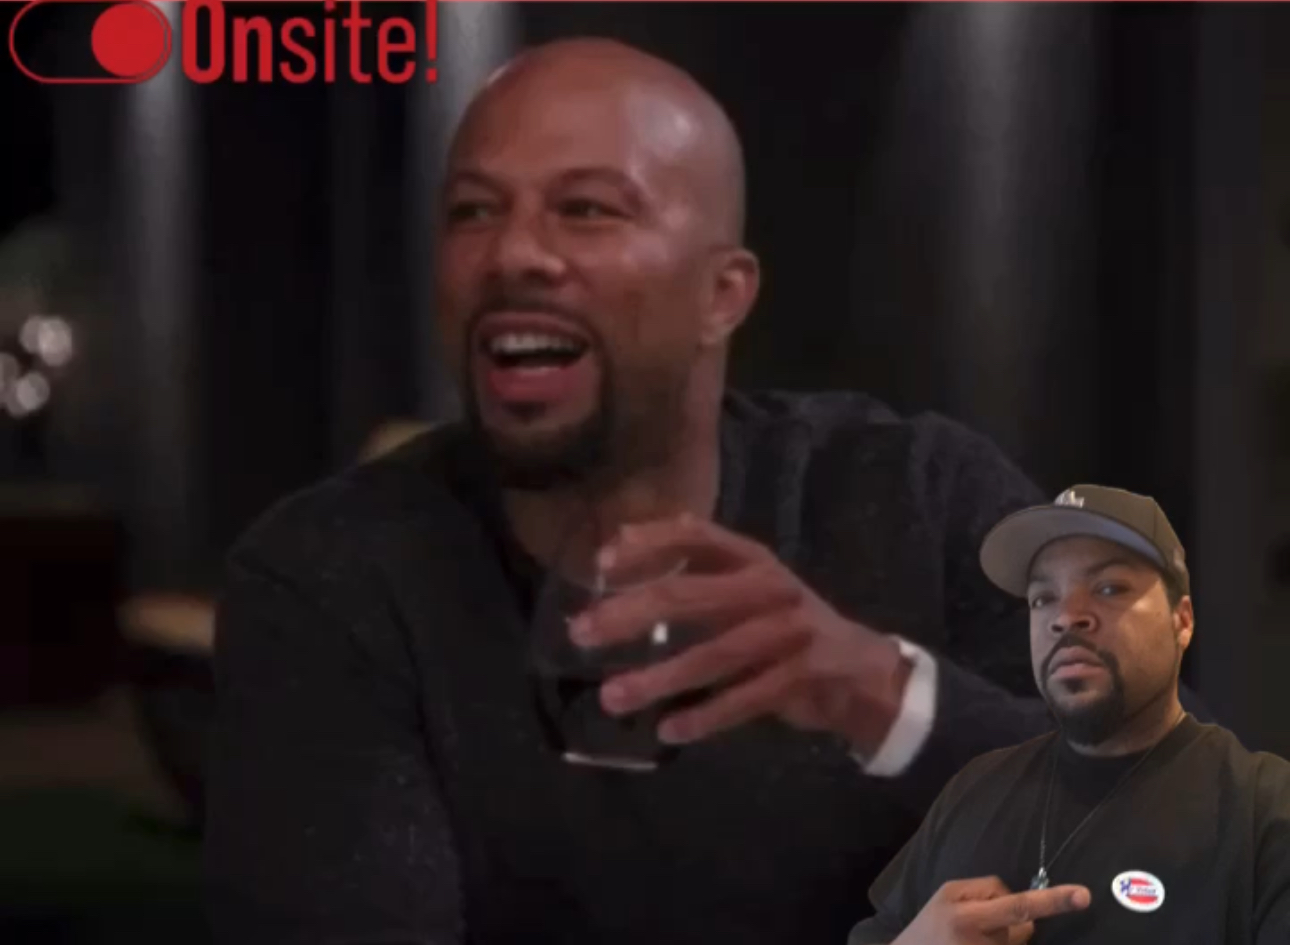 Rapper and actor Common recently reflected on his past conflict with musician Ice Cube in the 90s.